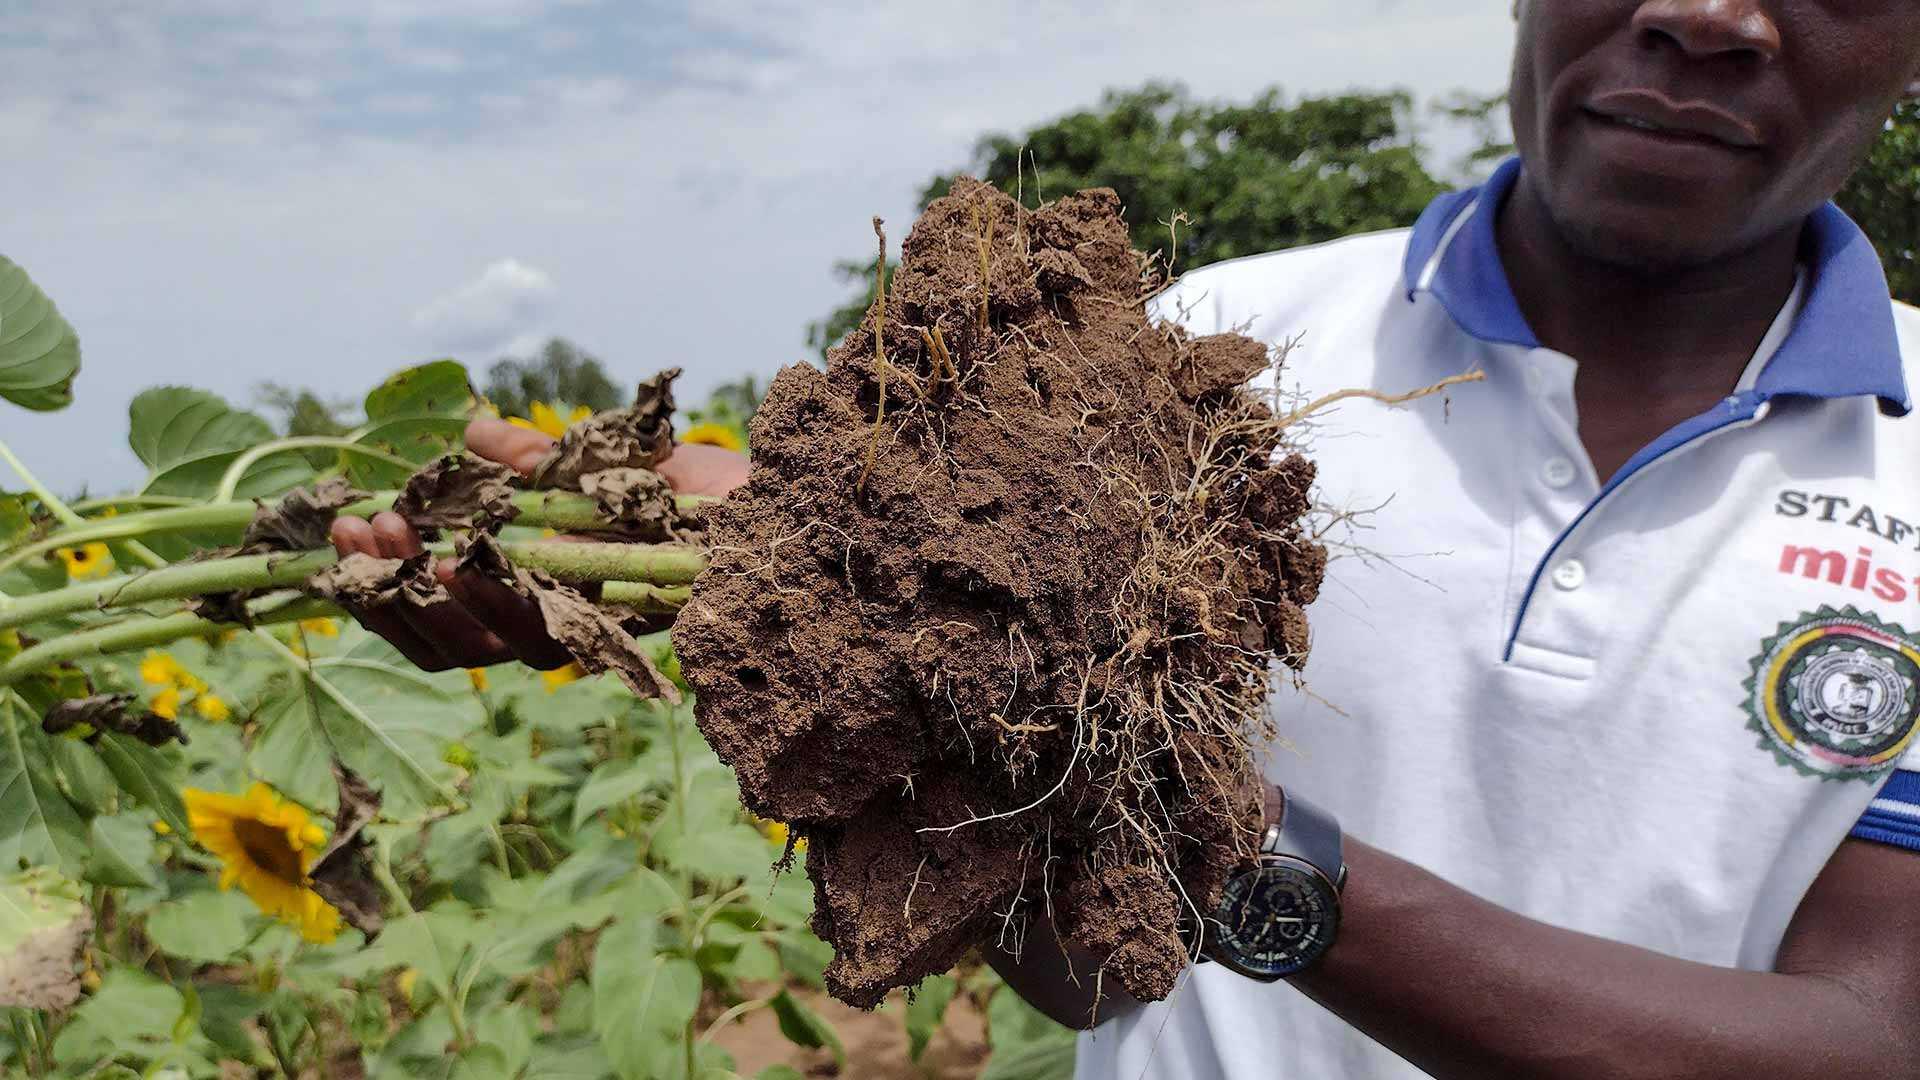 Farmer holds up a plant revealing shallow roots, because the soil is compacted by farming practices.